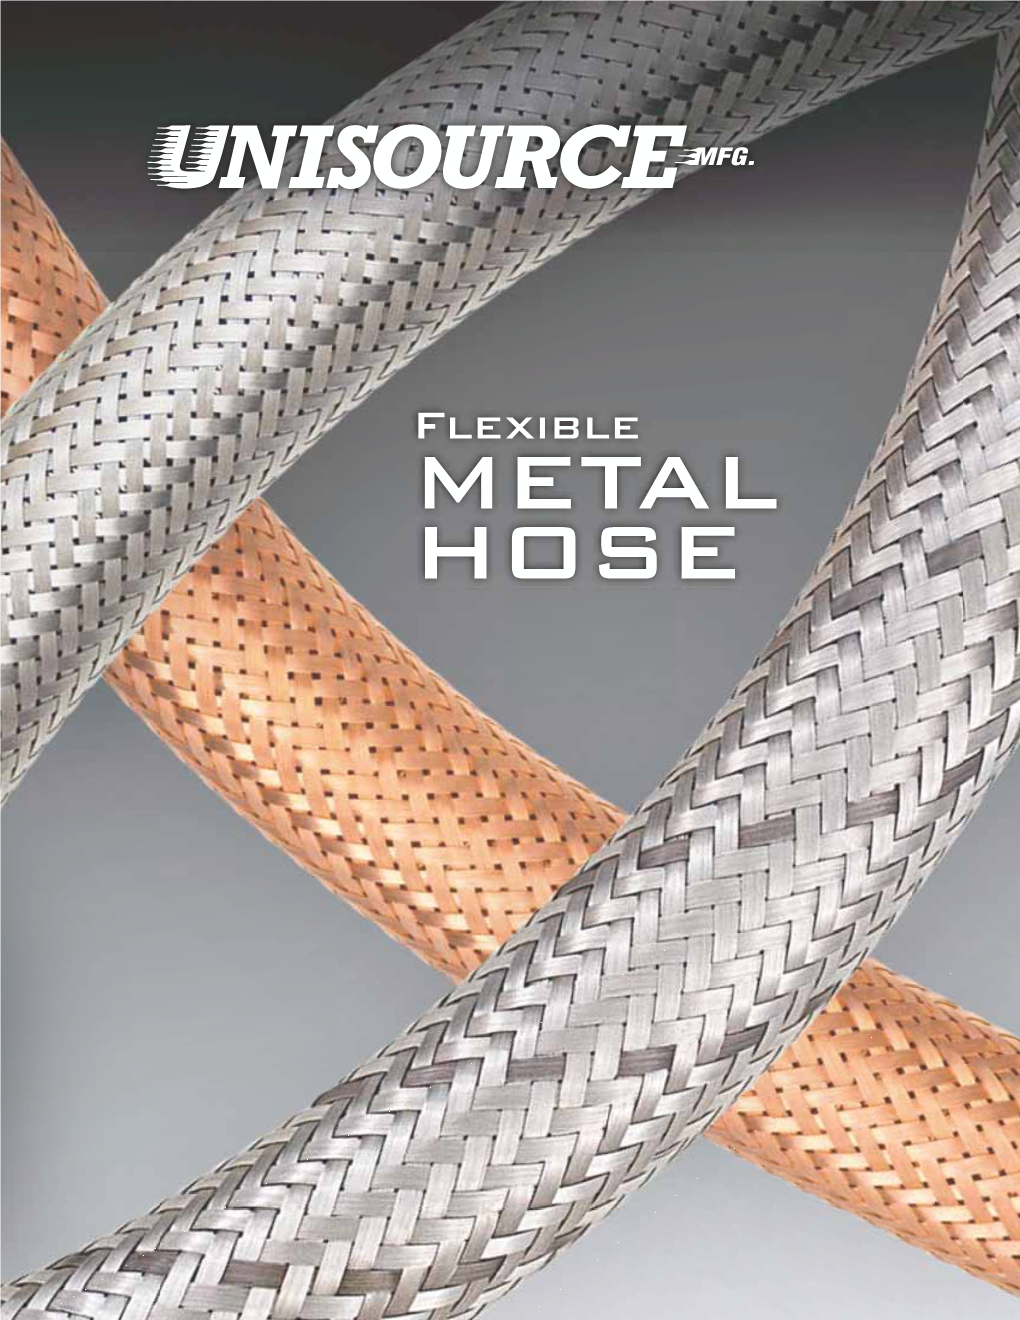 Flexible HOSE Is Among the Nation’S Leading Flexible Metal Hose Manufacturers with Over 25 Years of Experience in the Manufacture of Metal Hose Products